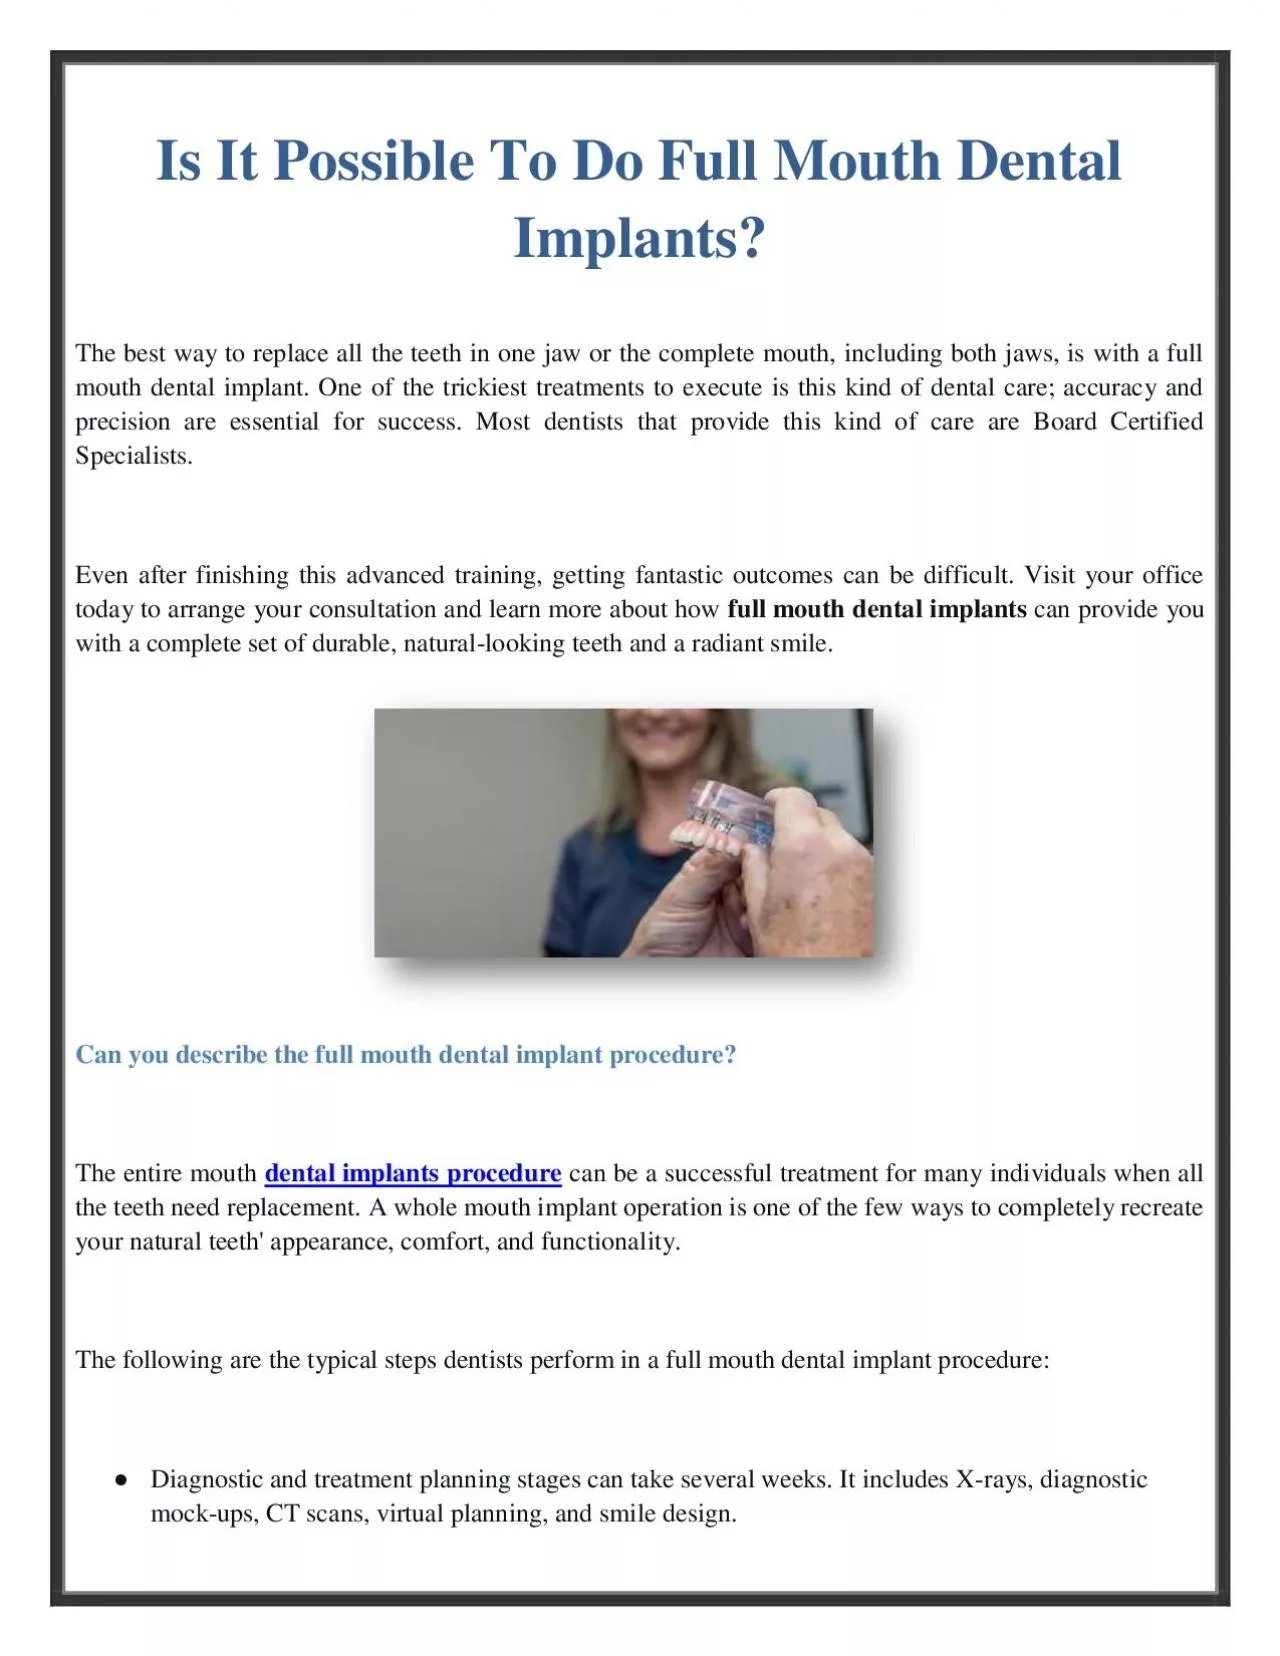 Is It Possible To Do Full Mouth Dental Implants?